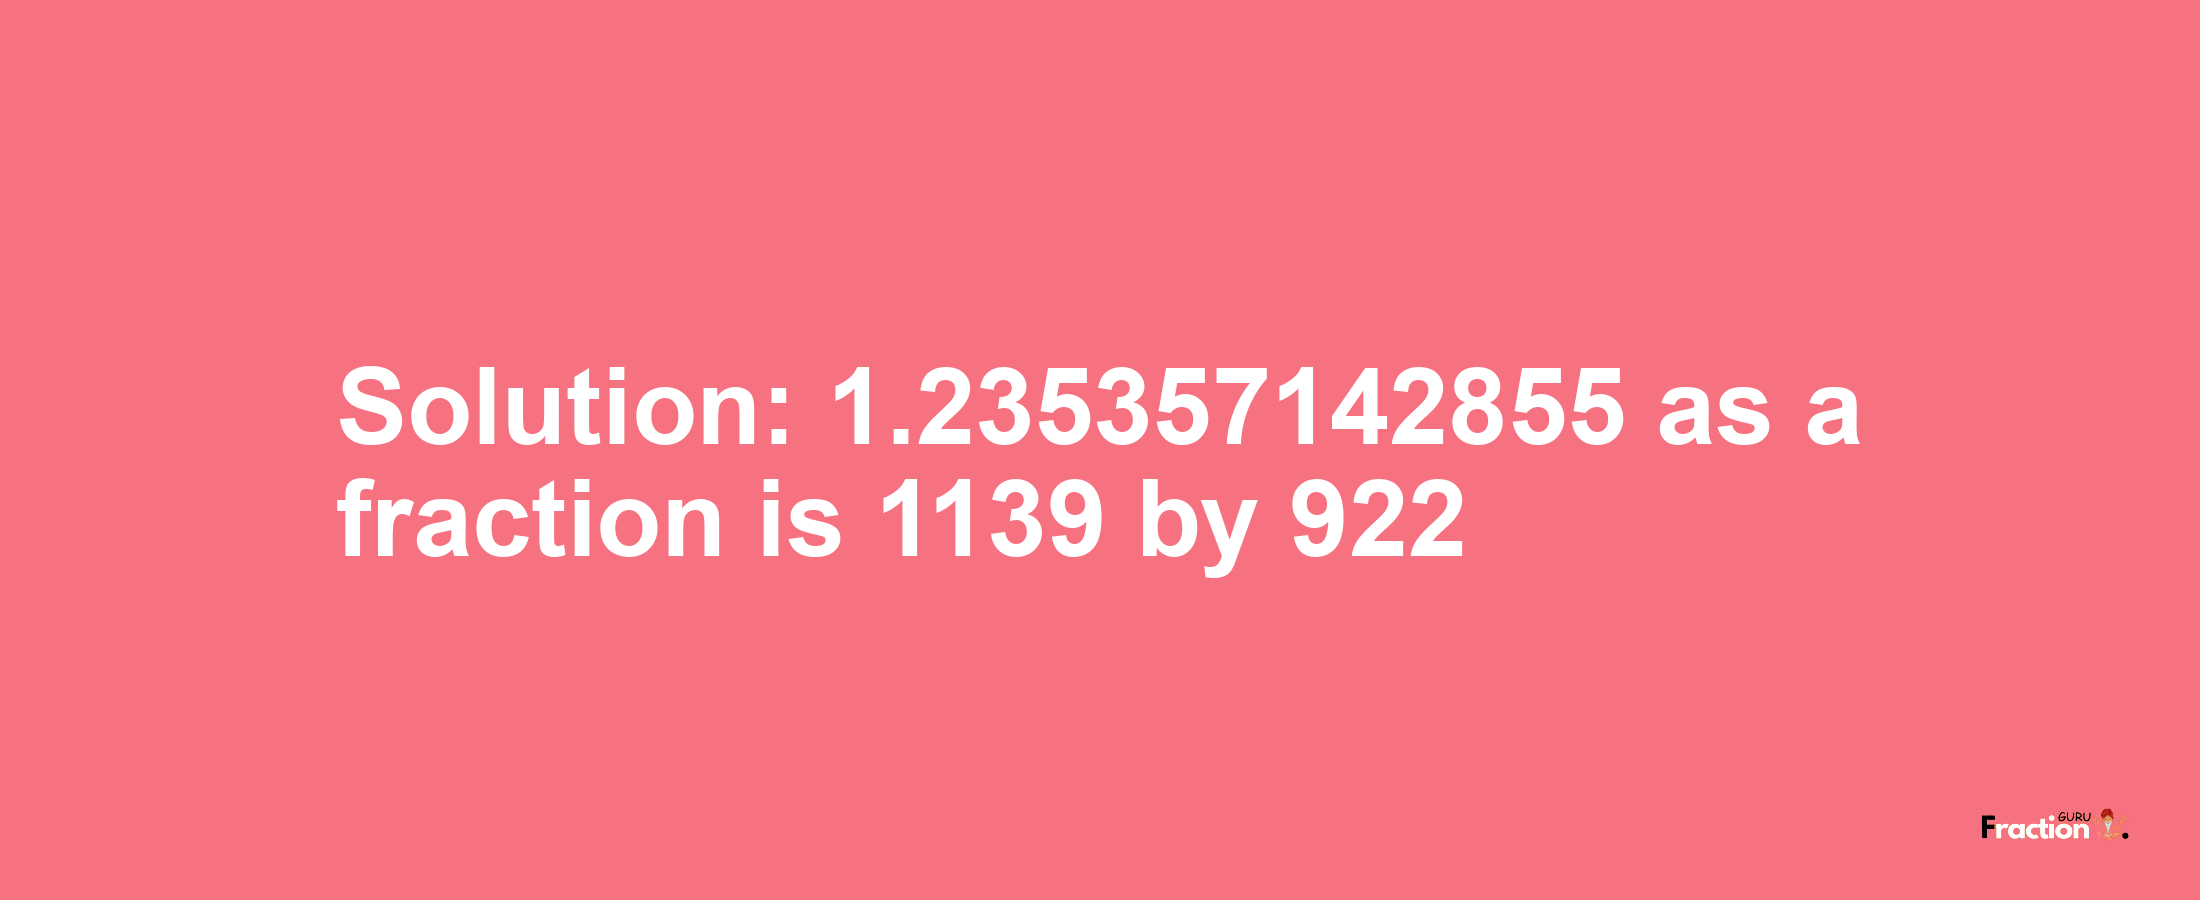 Solution:1.235357142855 as a fraction is 1139/922